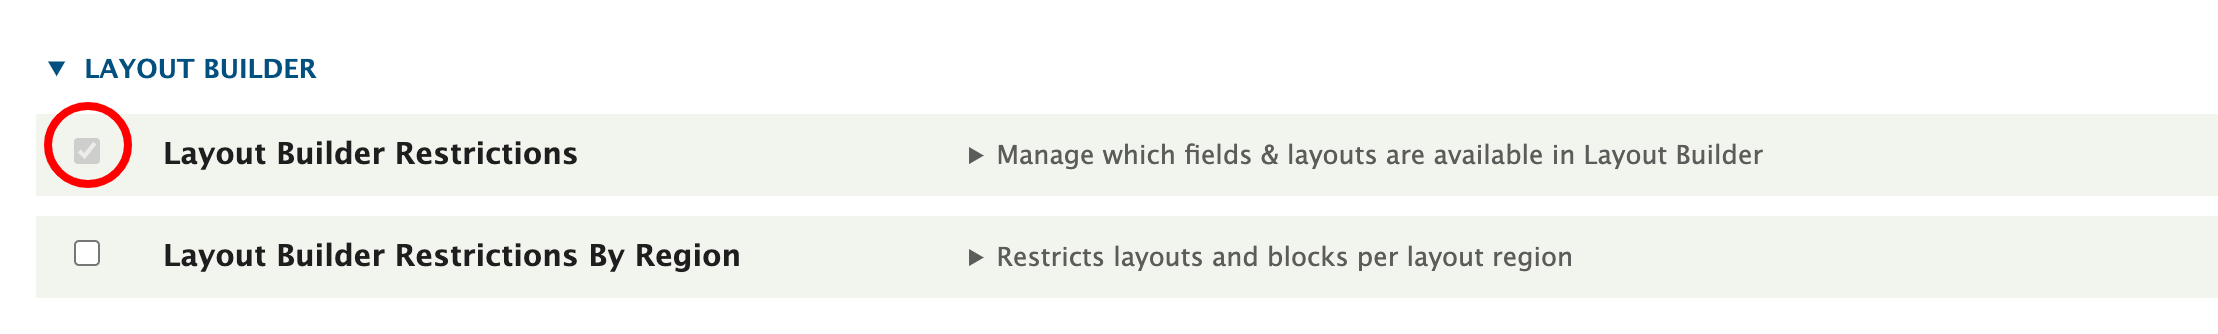 Layout Builder Restrictions 1